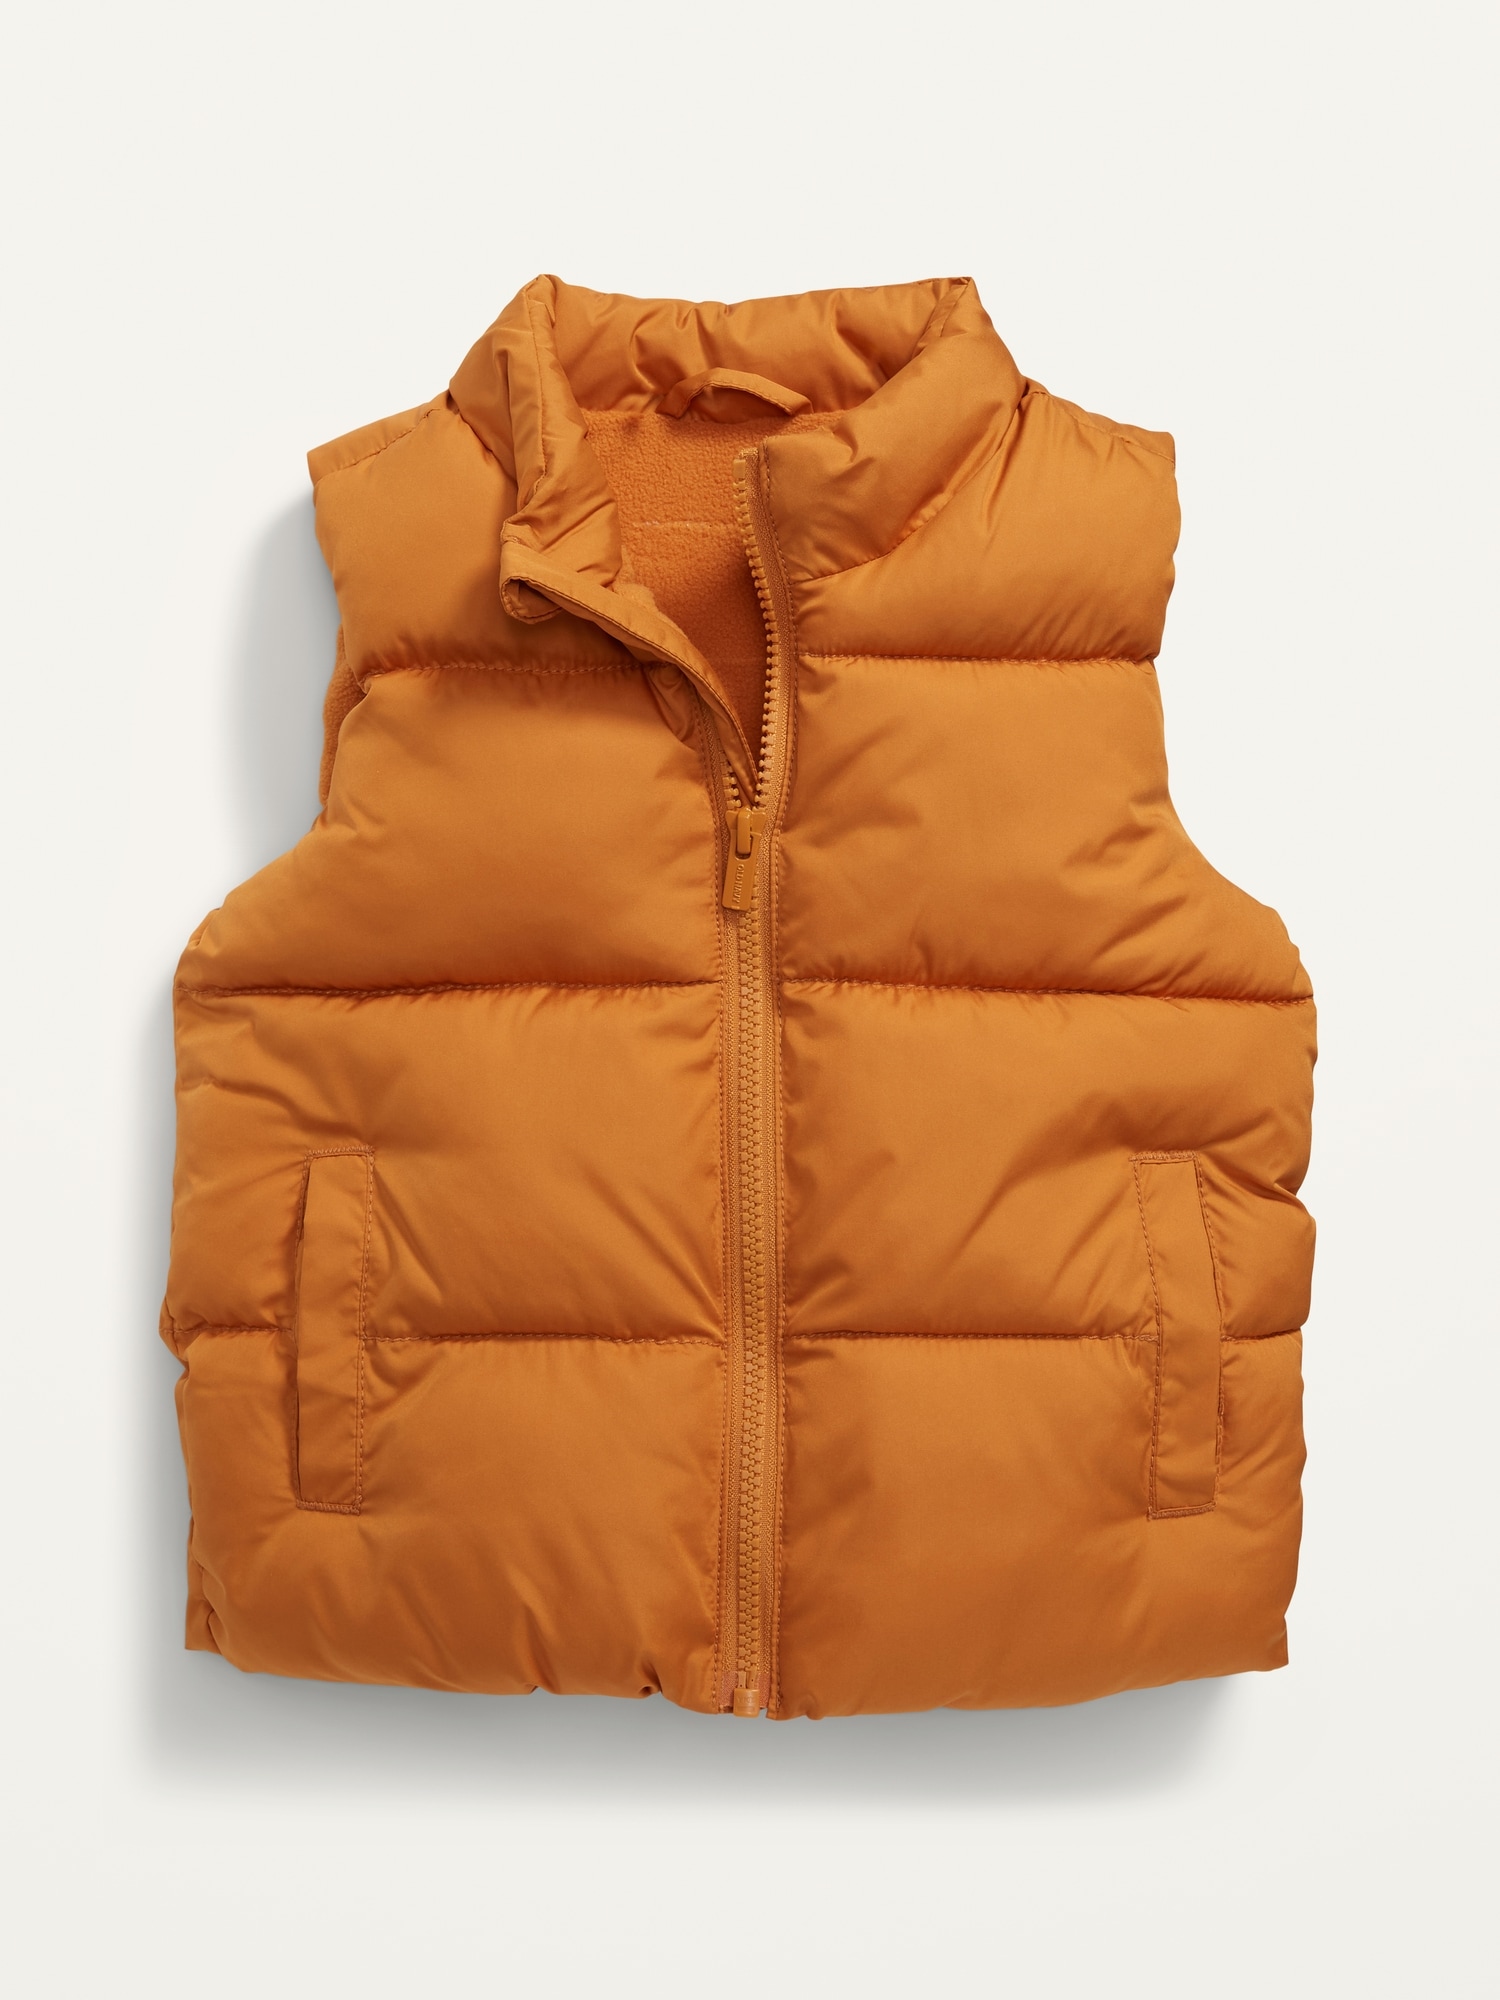 Unisex Solid Frost-Free Puffer Vest for Toddler